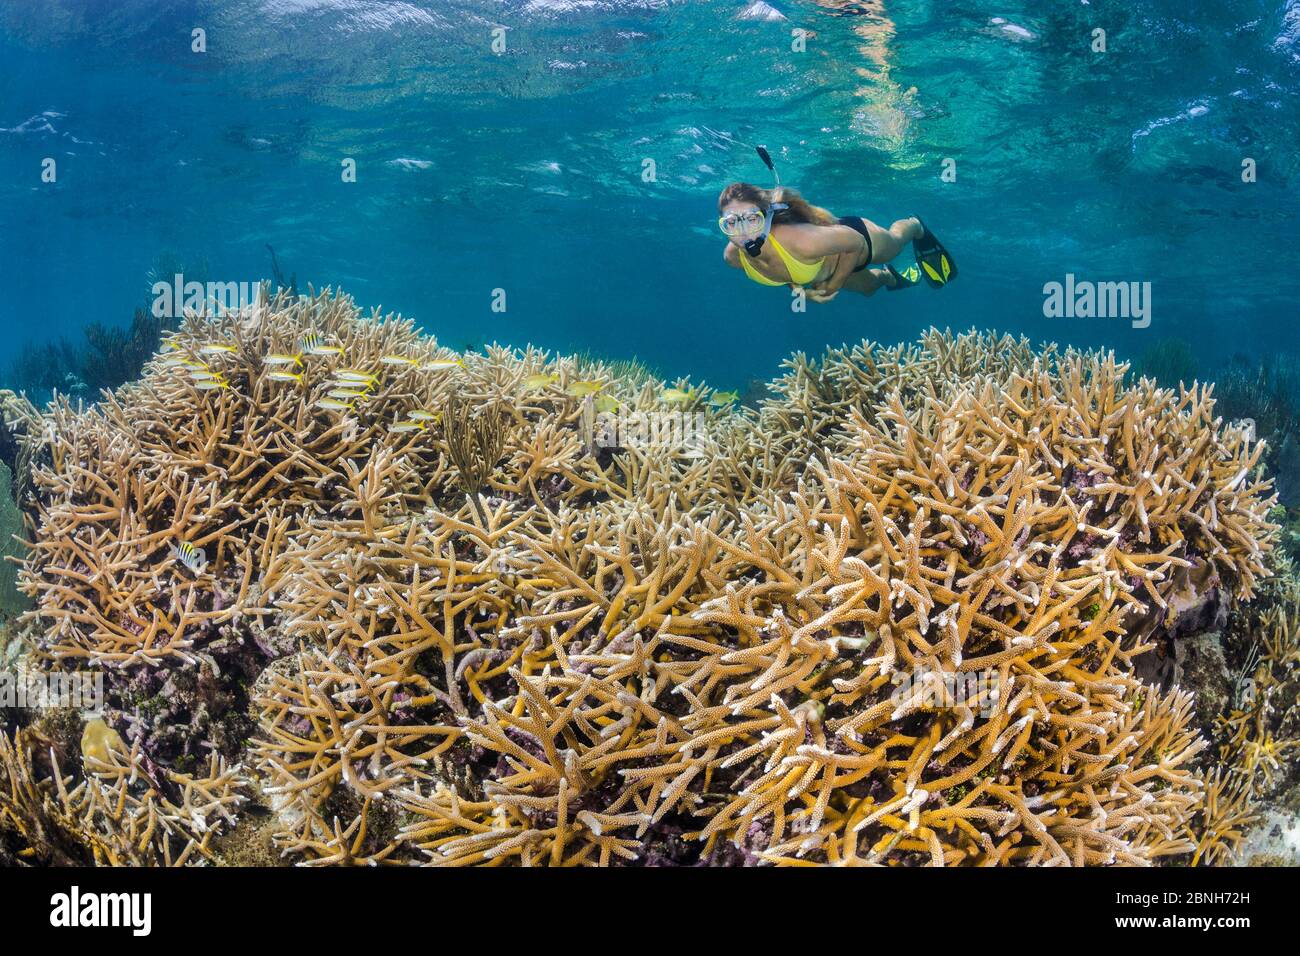 Snorkeller swimming over a shallow coral reef with a large stand of Staghorn coral (Acropora cervicornis). North Wall, Grand Cayman, Cayman Islands, B Stock Photo